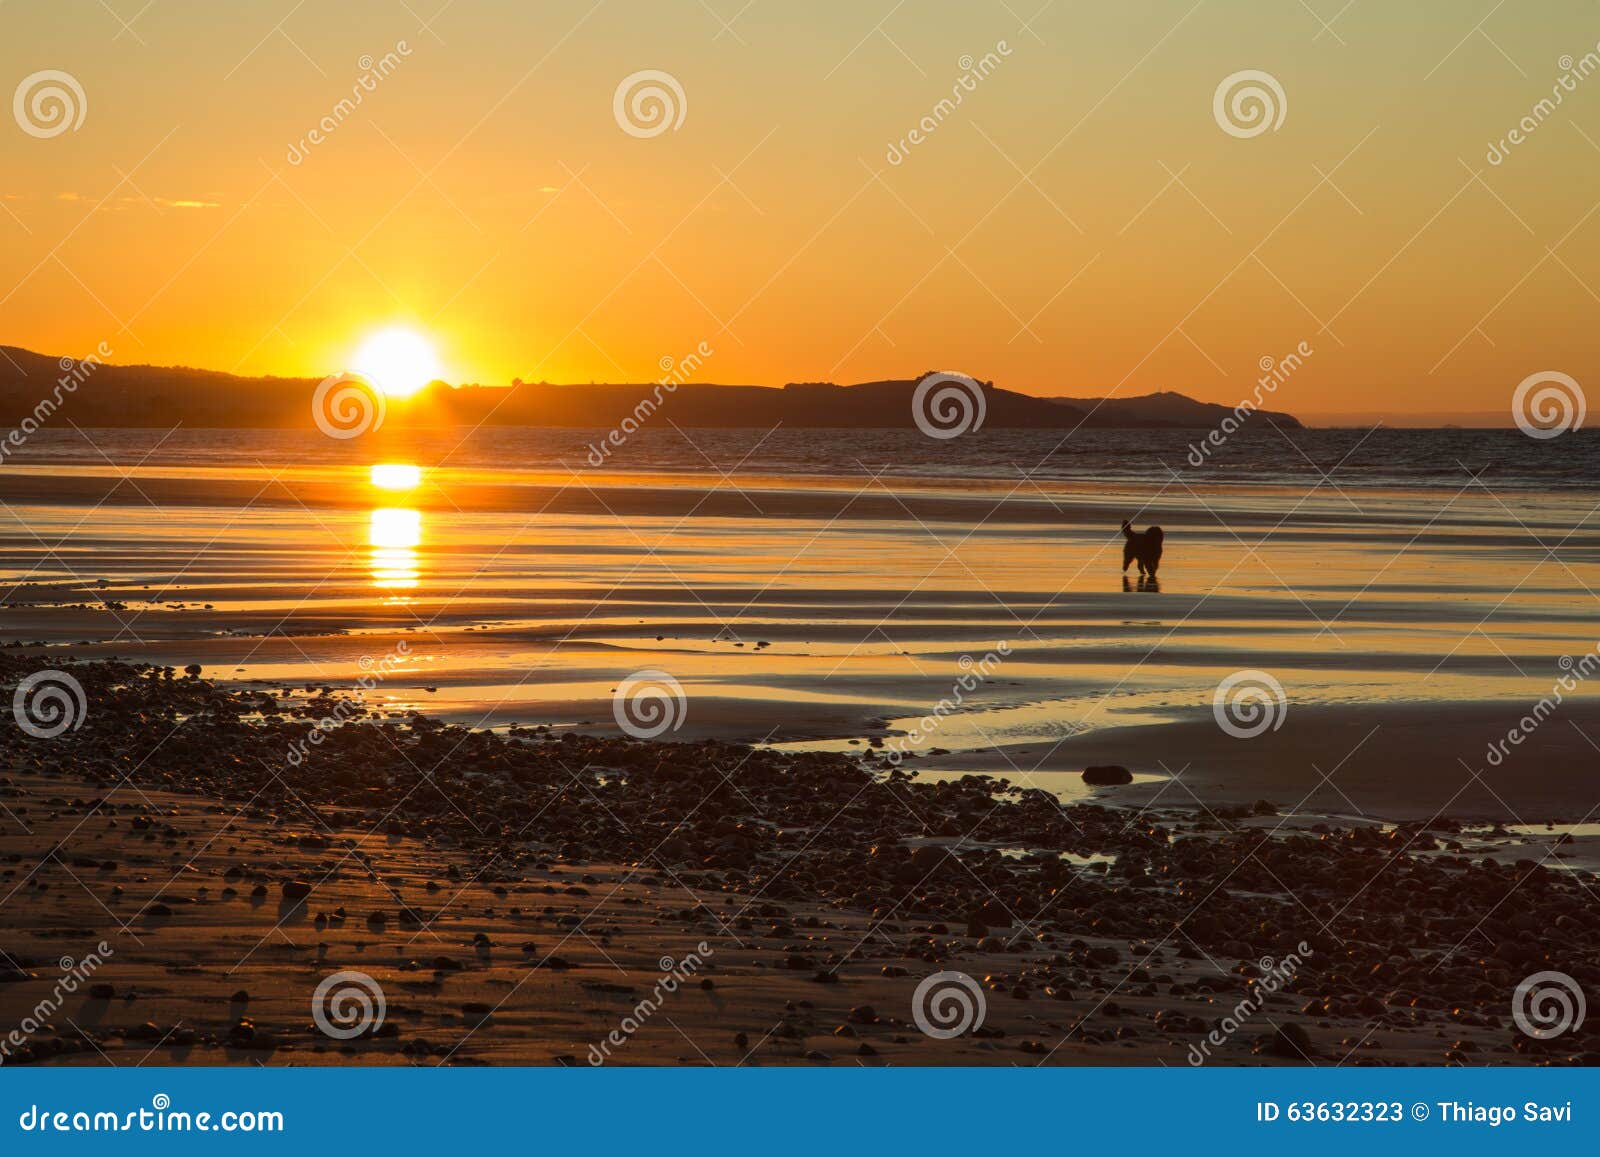 a dog at the beach during sunset